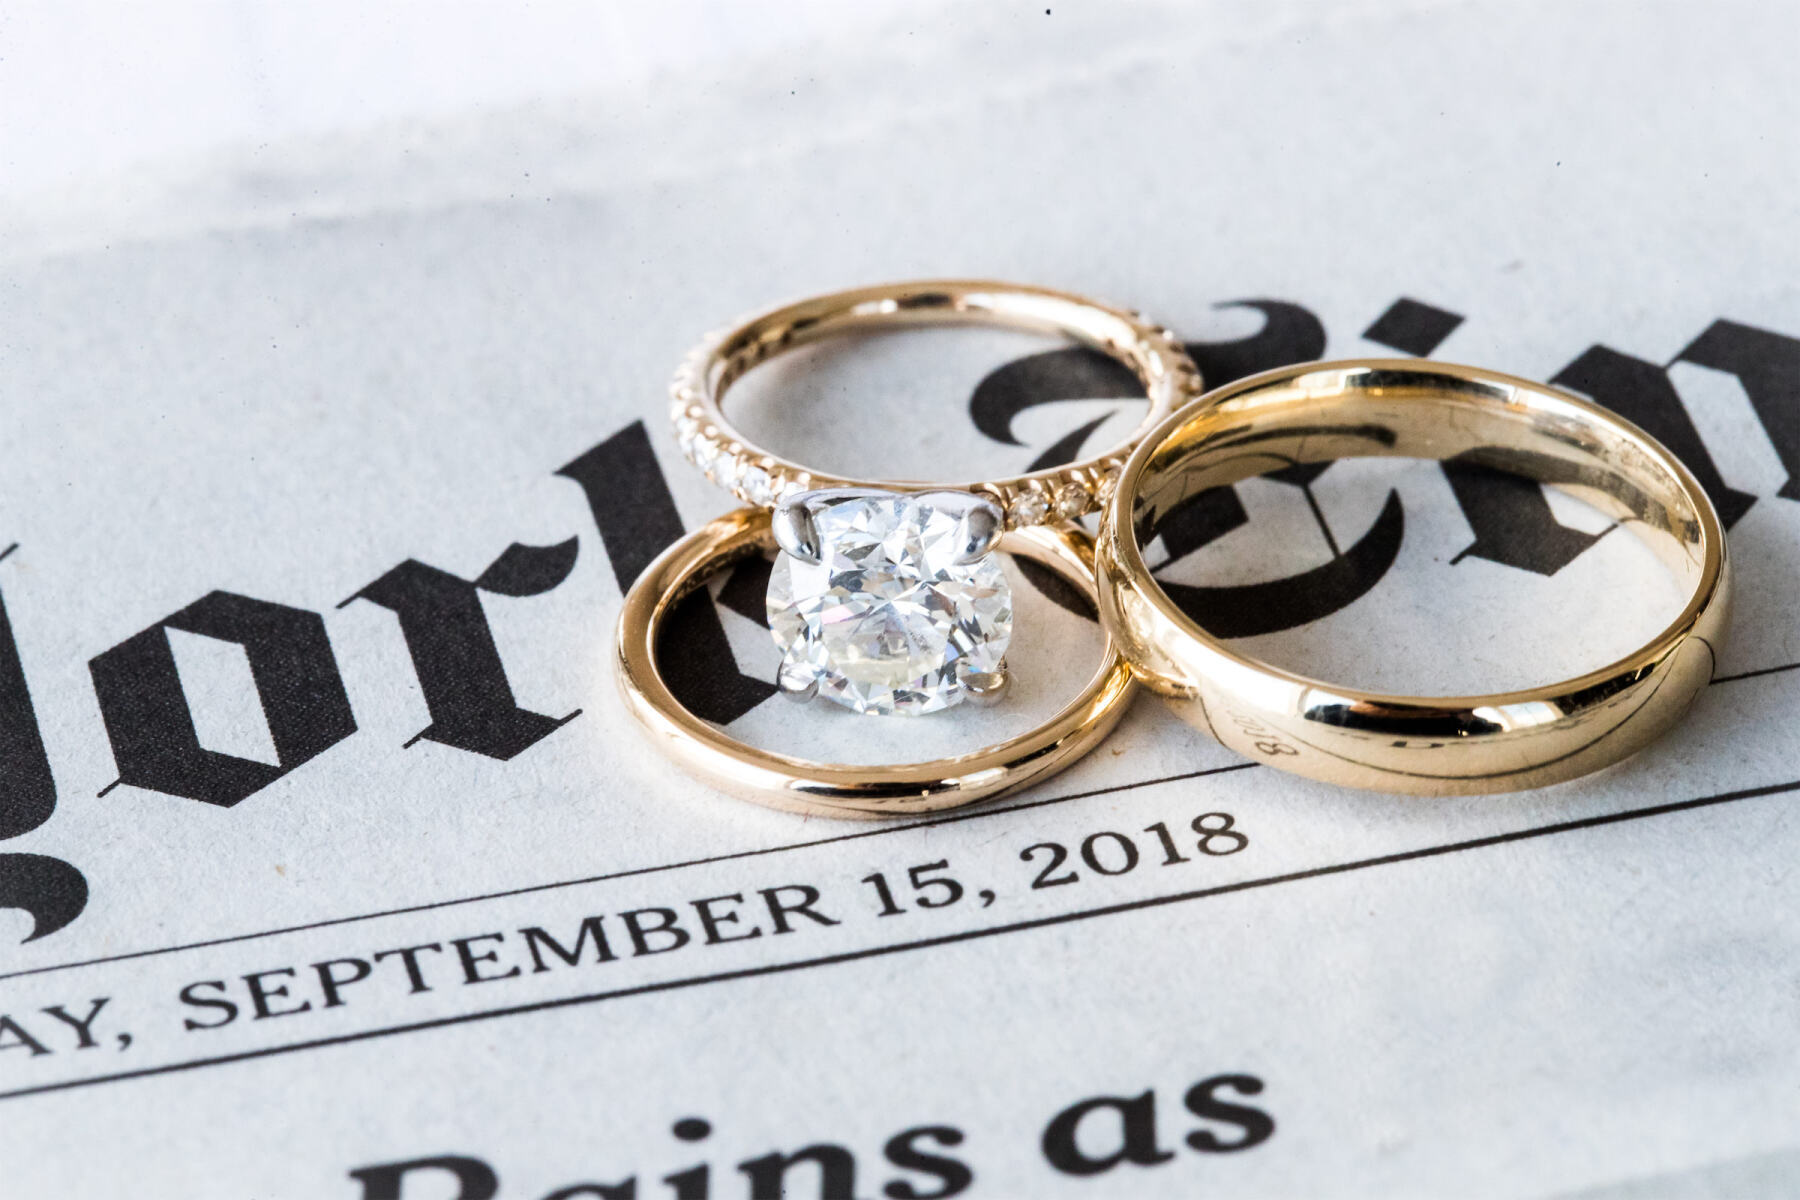 Wedding Ring Design: A round cut diamond engagement ring and two golden wedding bands sitting on top of the front page of the New York Times.